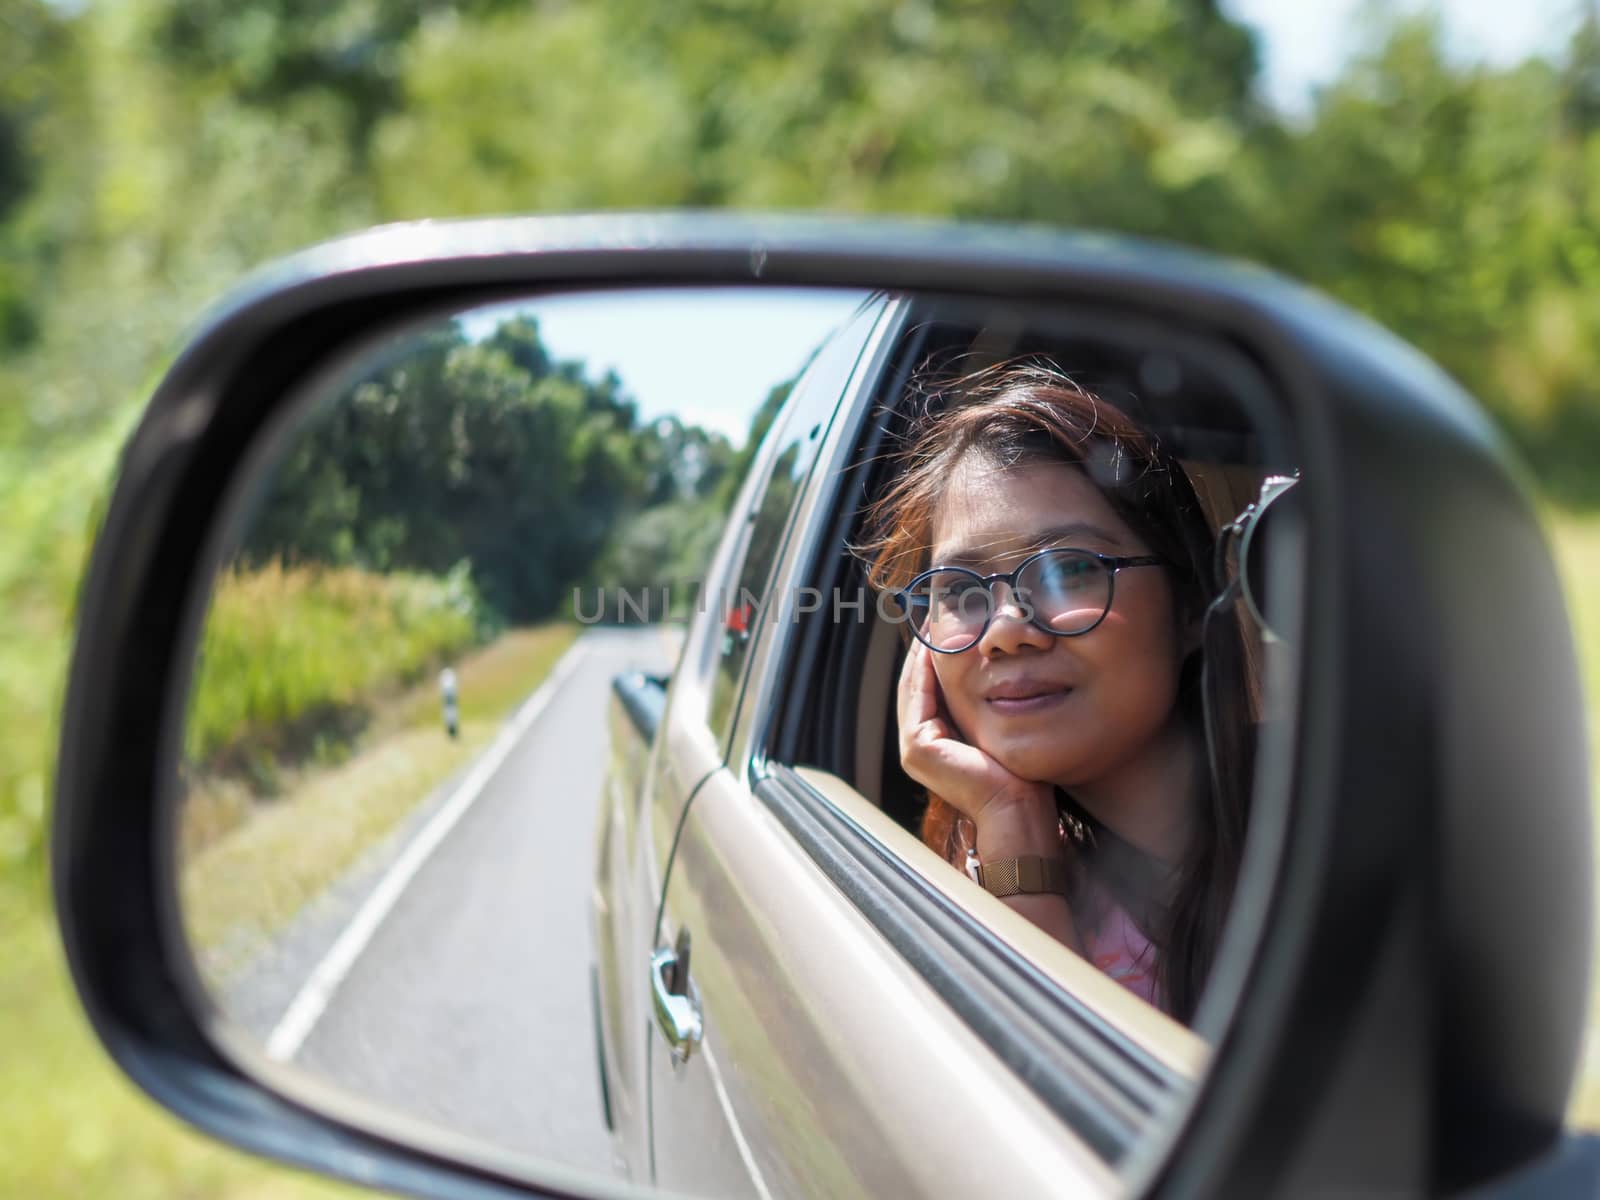 A woman's side-view mirror looking out of the car While driving a car.